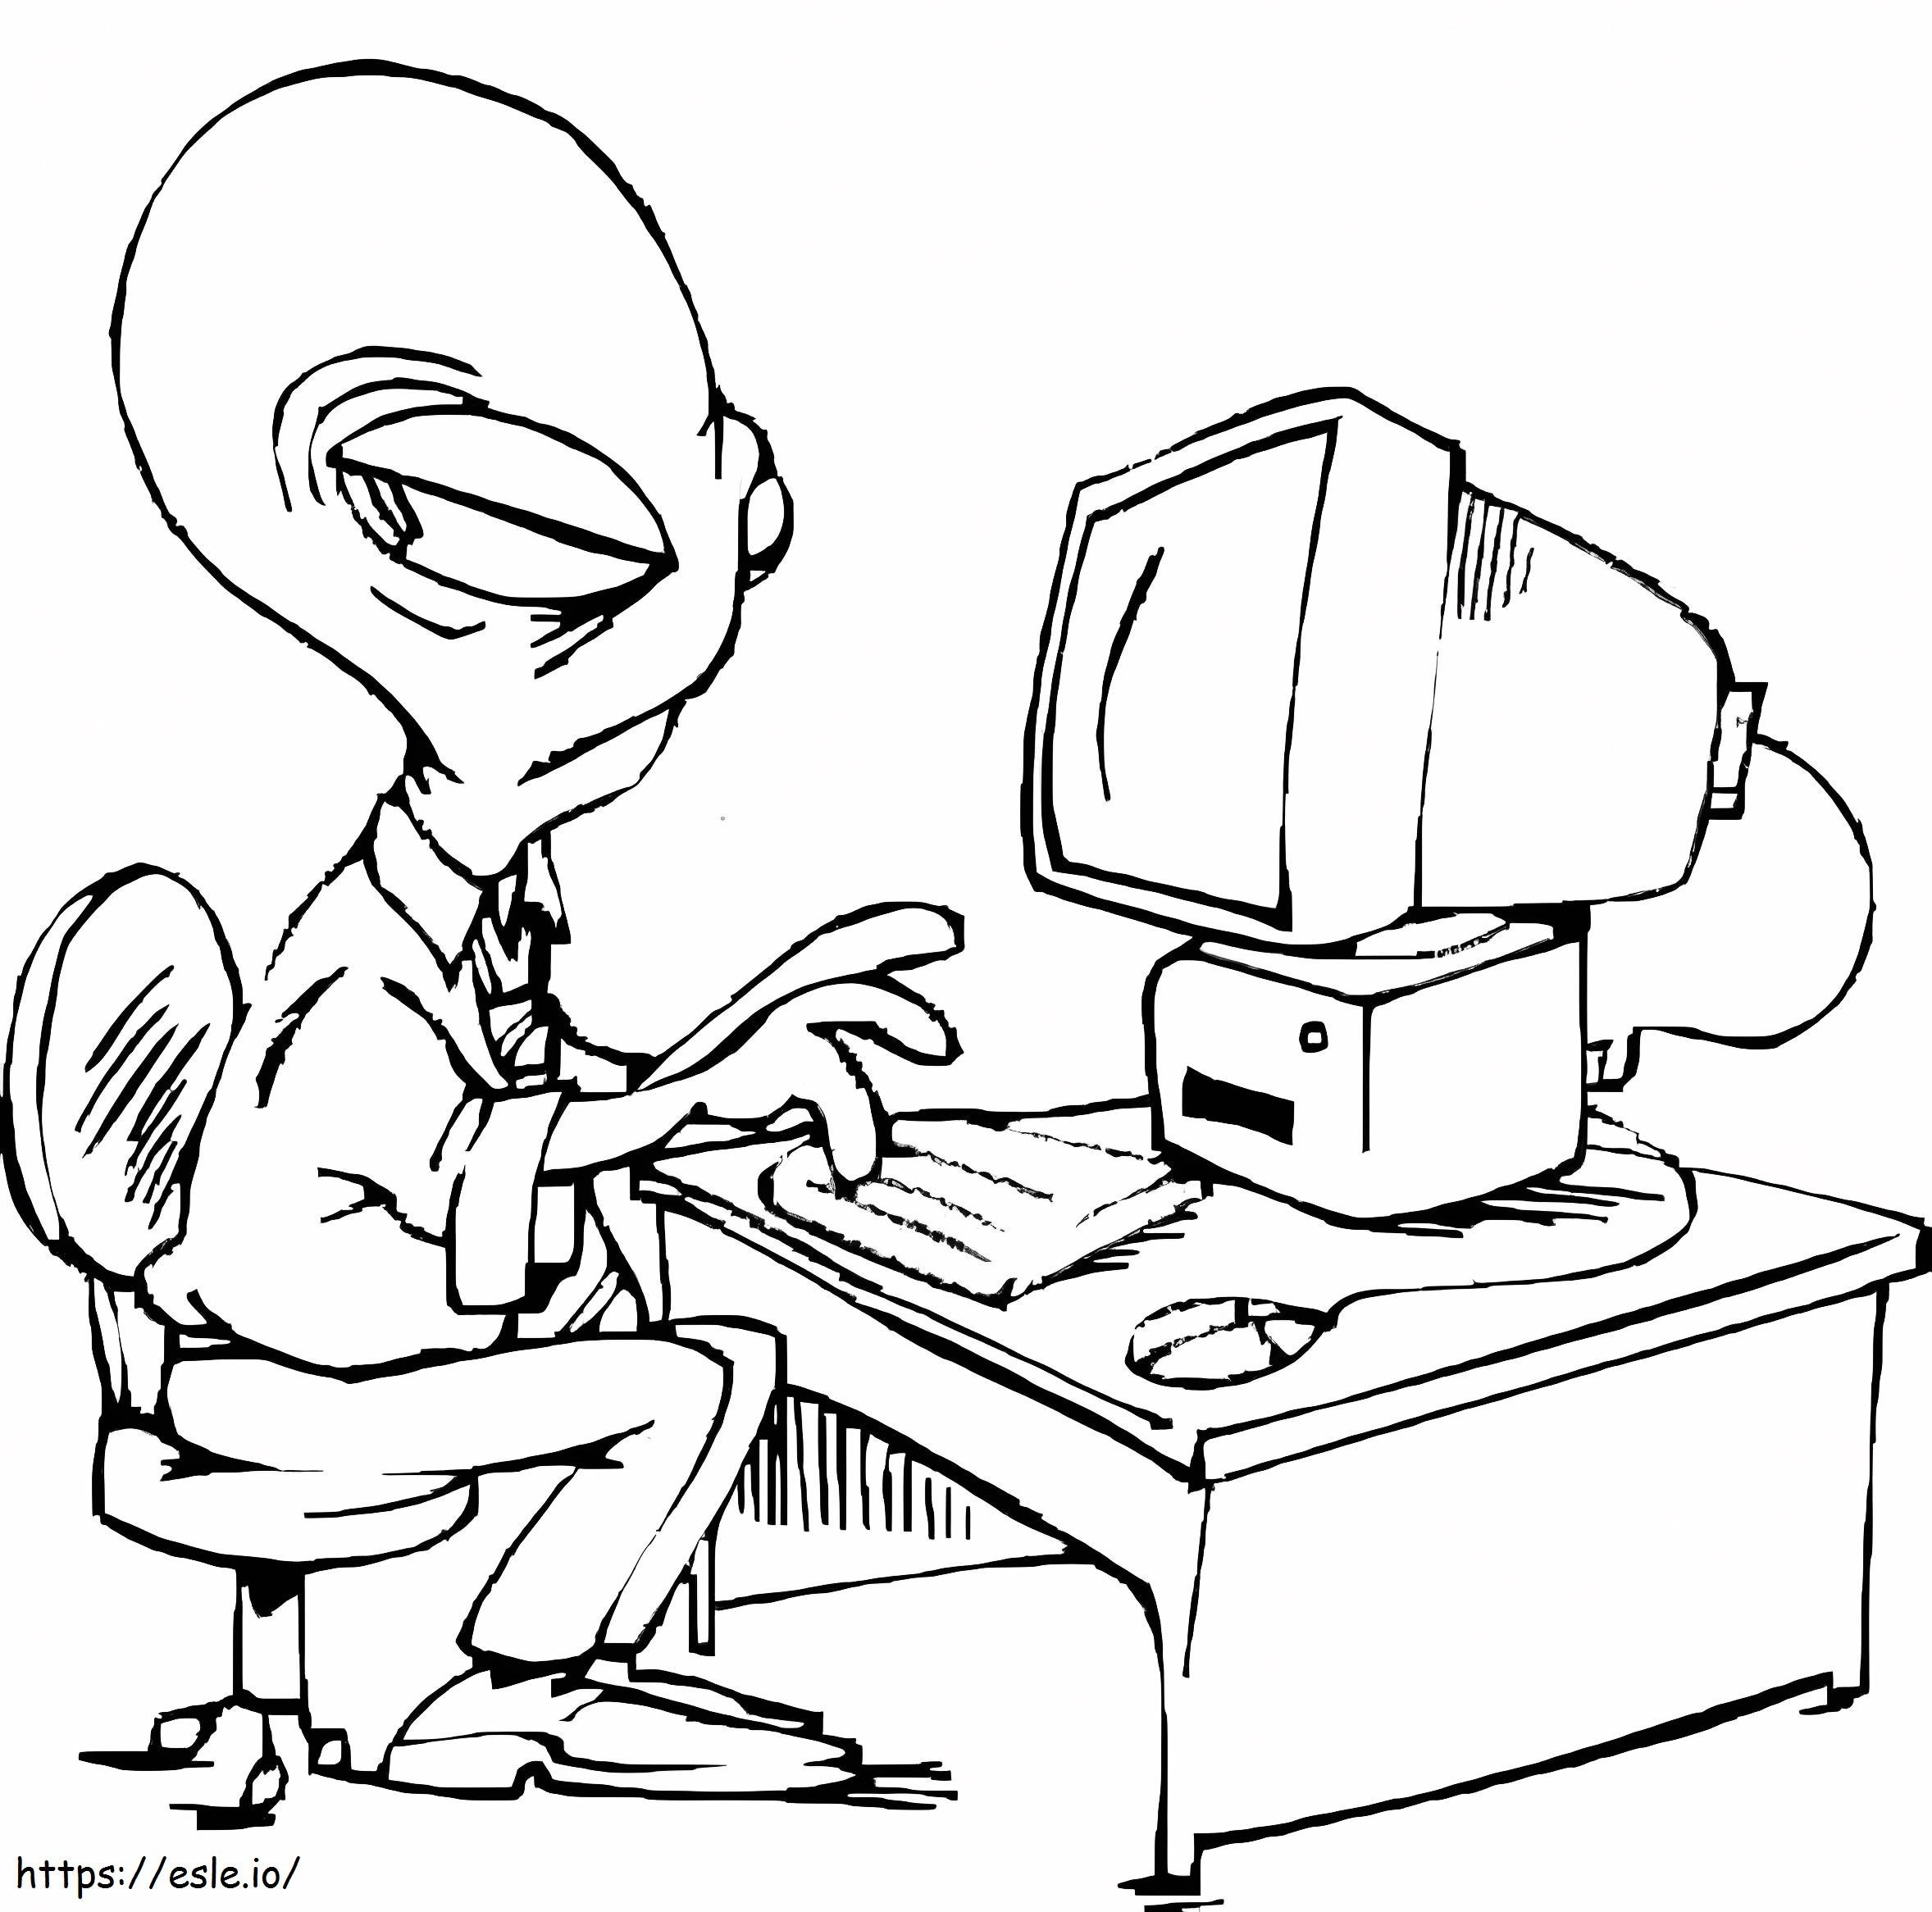 Alien With Computer coloring page